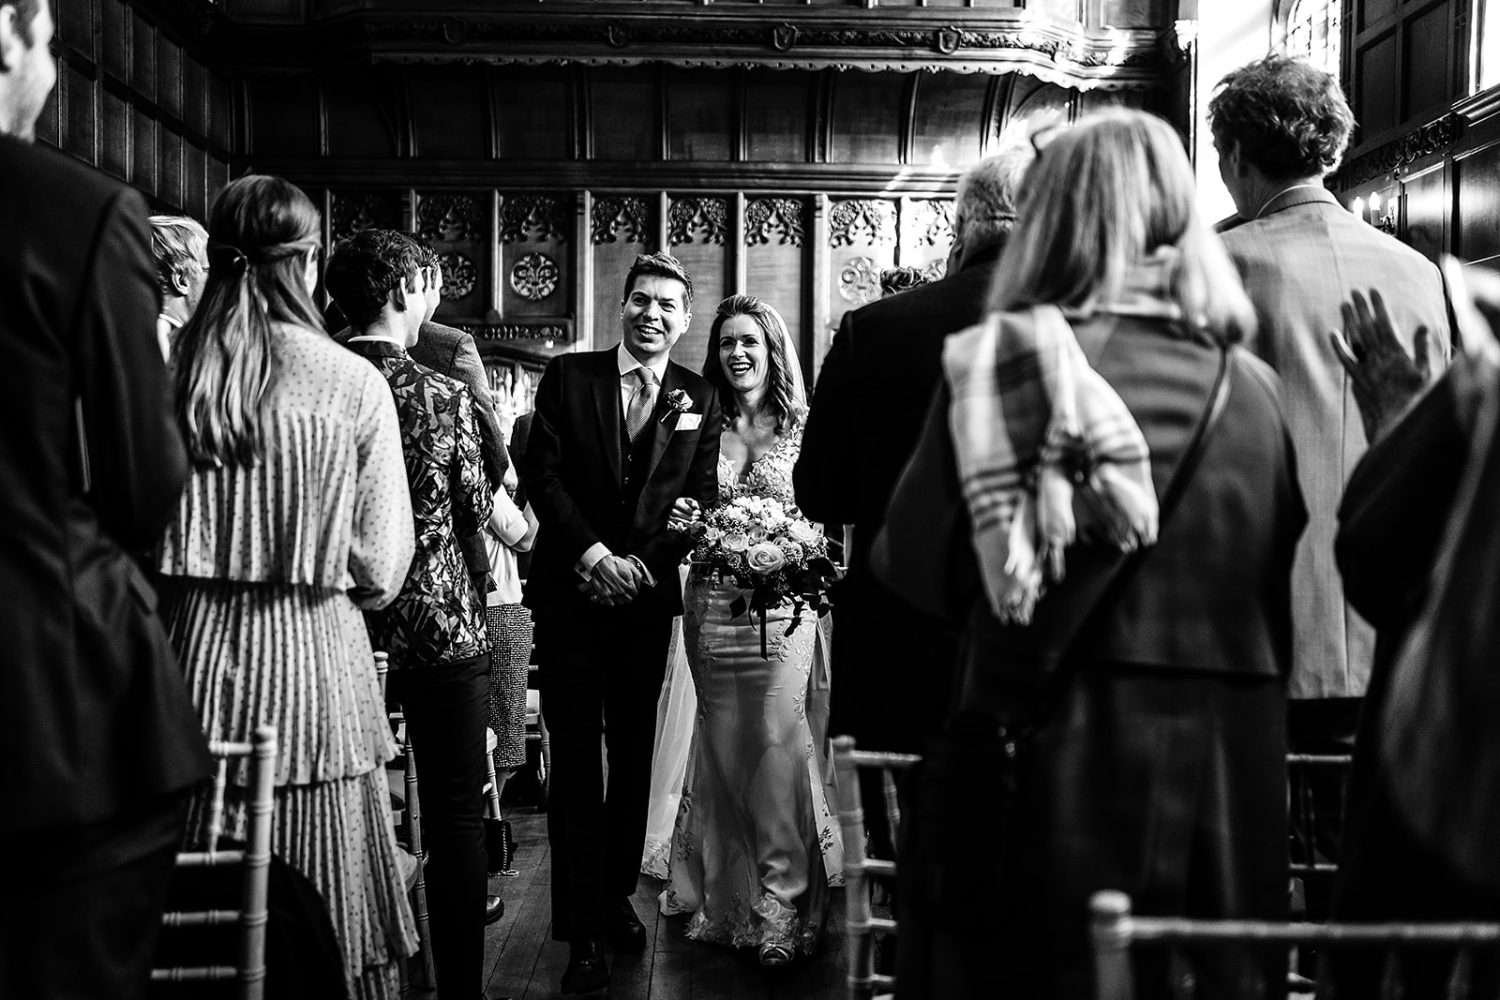 A black and white photo from a wedding in Suffolk at Hengrave hall. We see a Bride and Groom arm in arm and smiling as they leave their wedding ceremony. Their guests and family are clapping and smiling too. The groom is in morning suit and the brisde wears a lace dress with veil. 